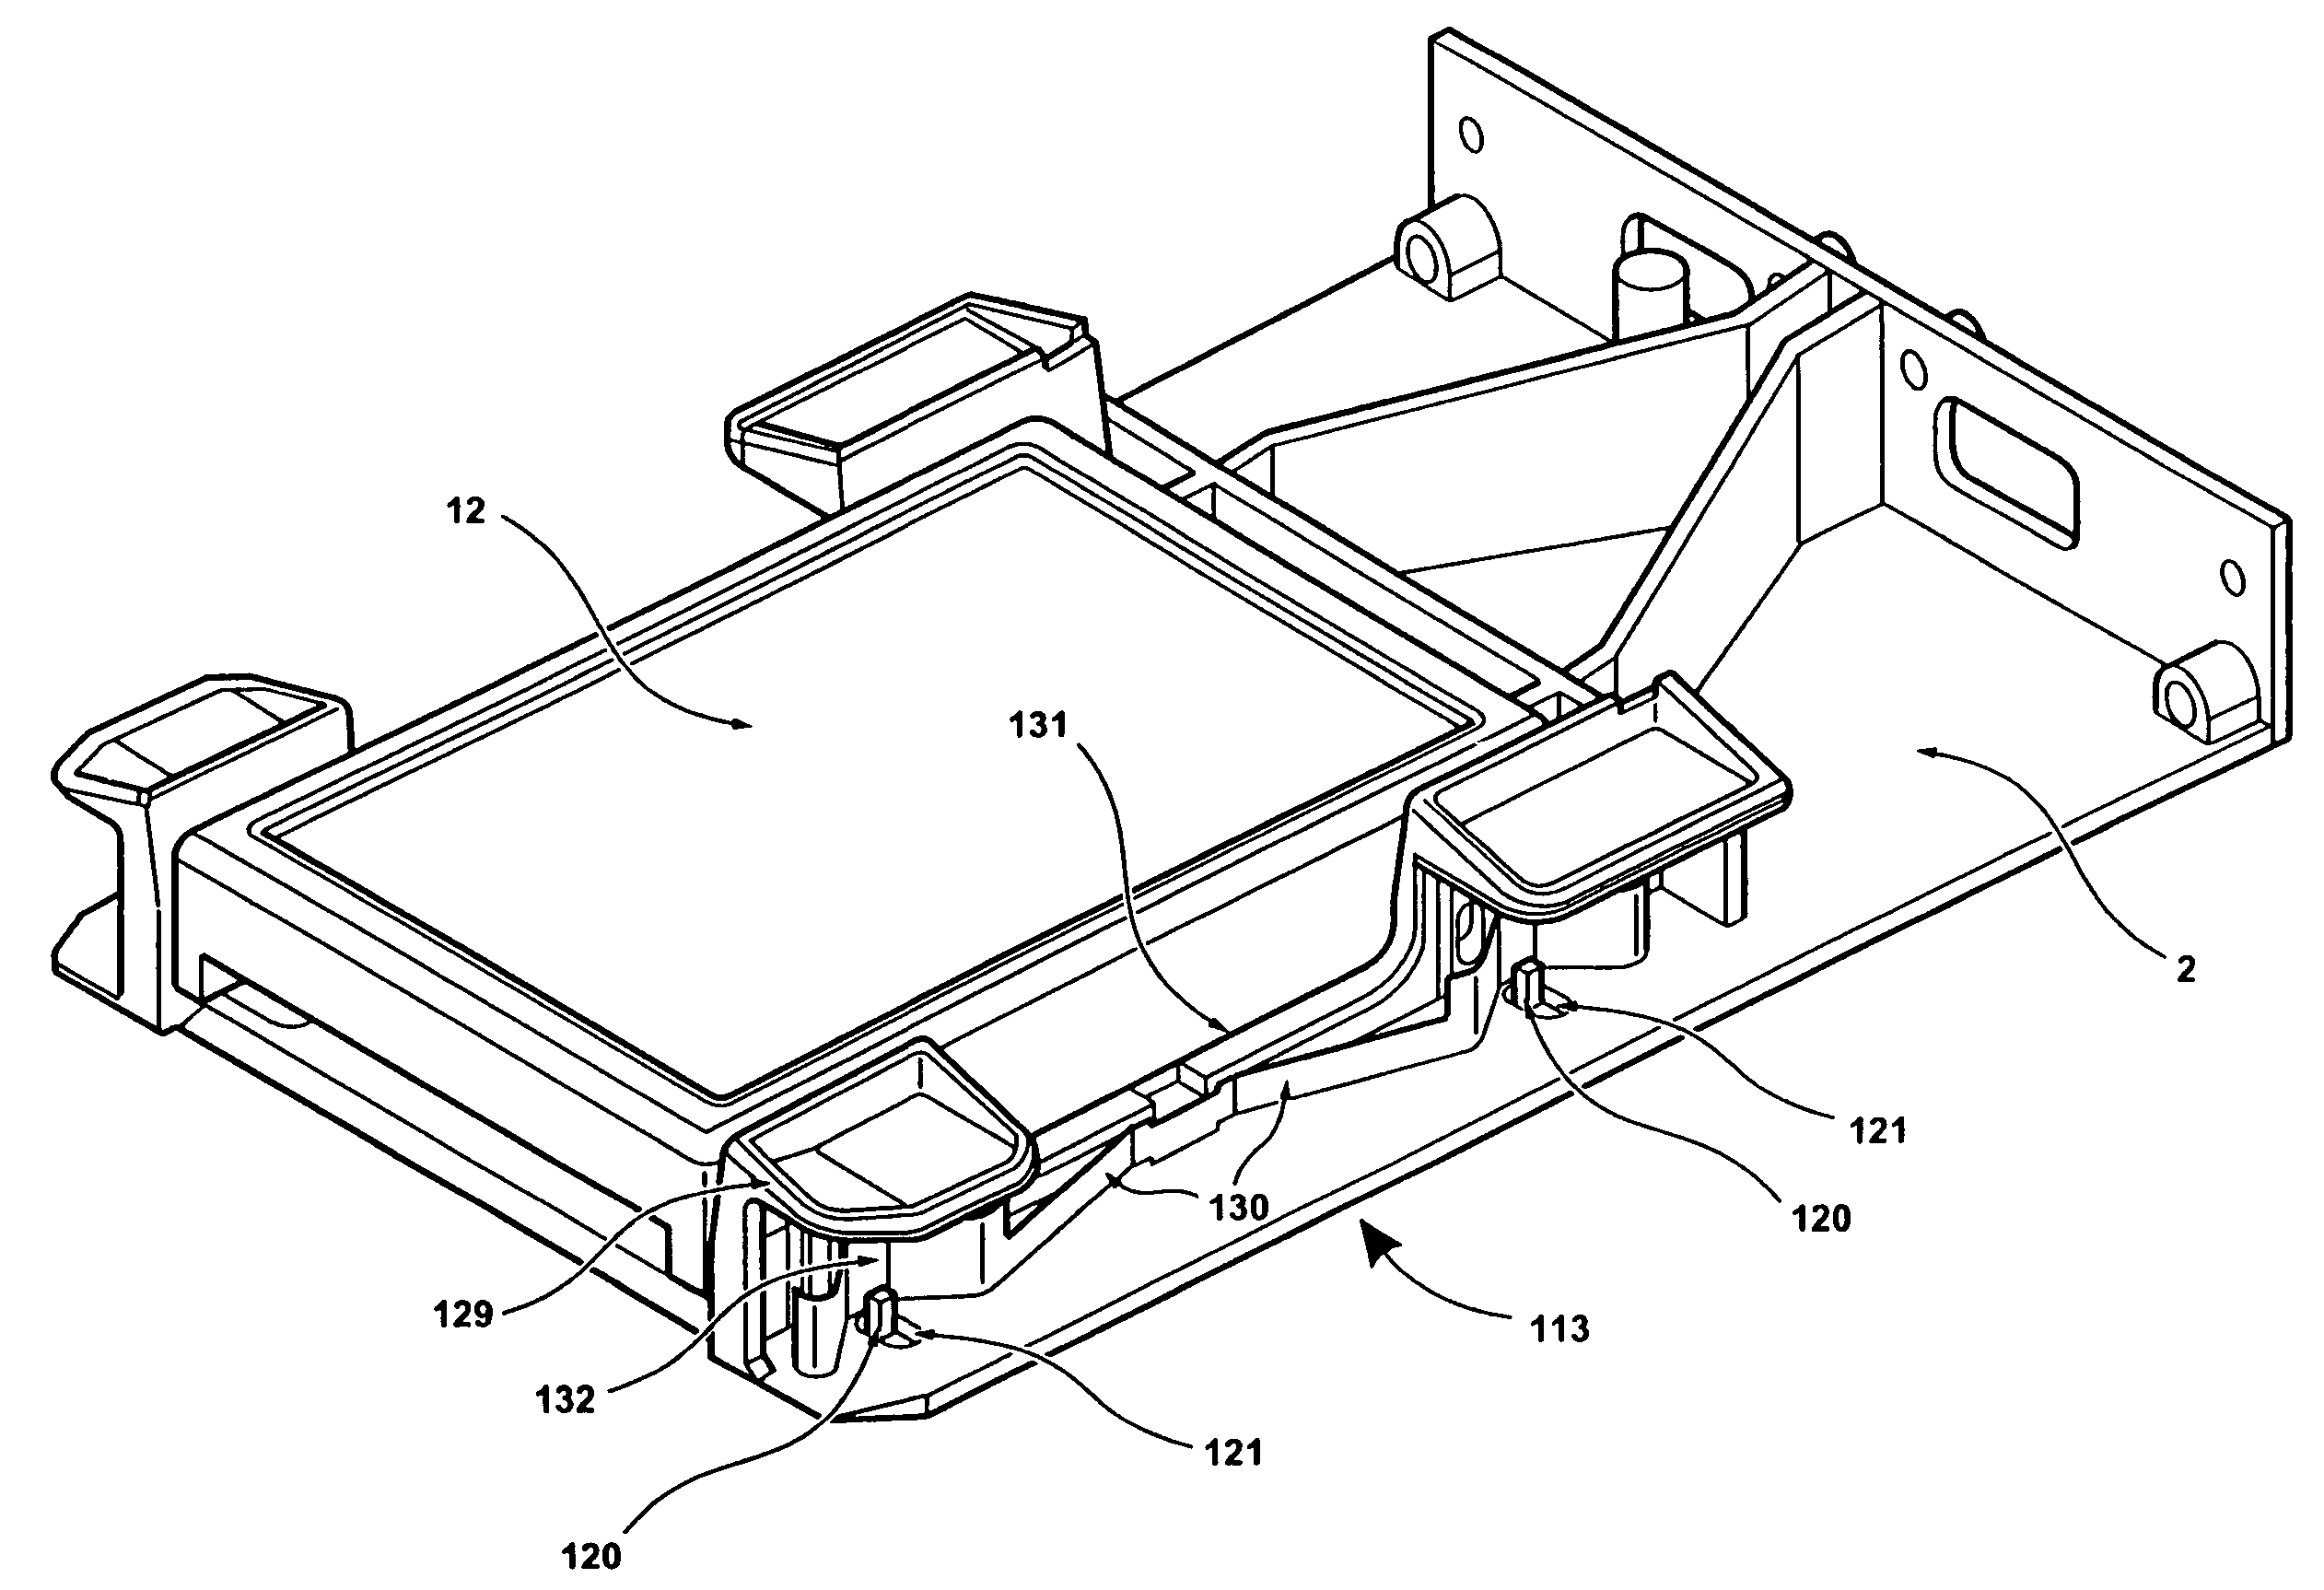 Disk drive support assembly, clamp assembly and disk drive carrier